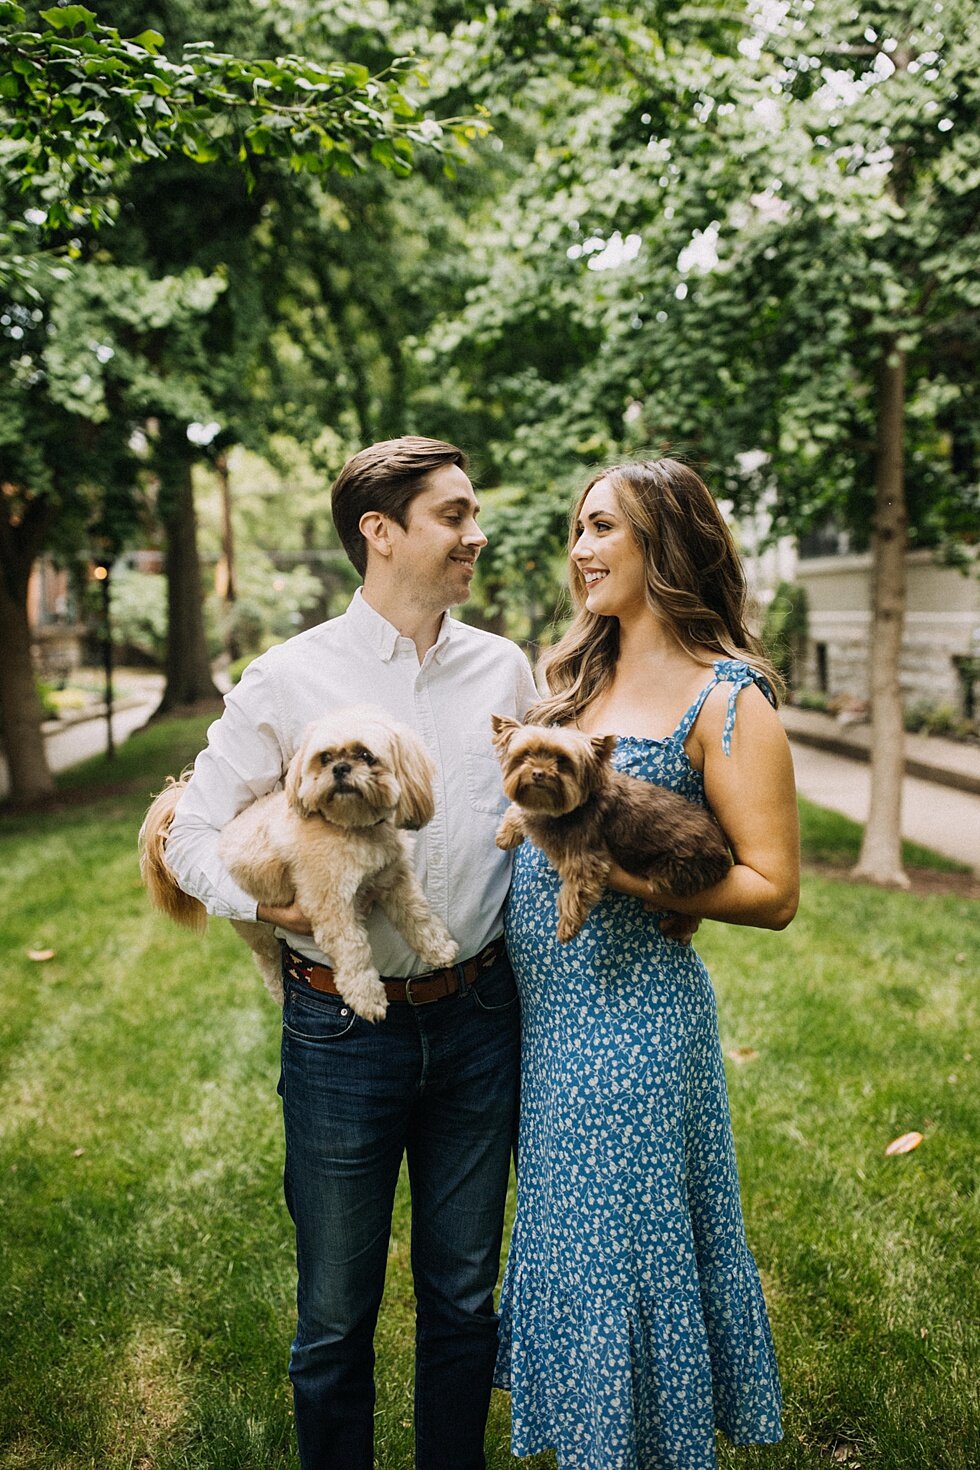  Gazing into each others eyes in this beautiful lush green garden holding their furry family while they take engagement photos and get ready to tie the knot as husband and wife. #engagementphotos #savethedatephotos #savethedates #engagementphotograph